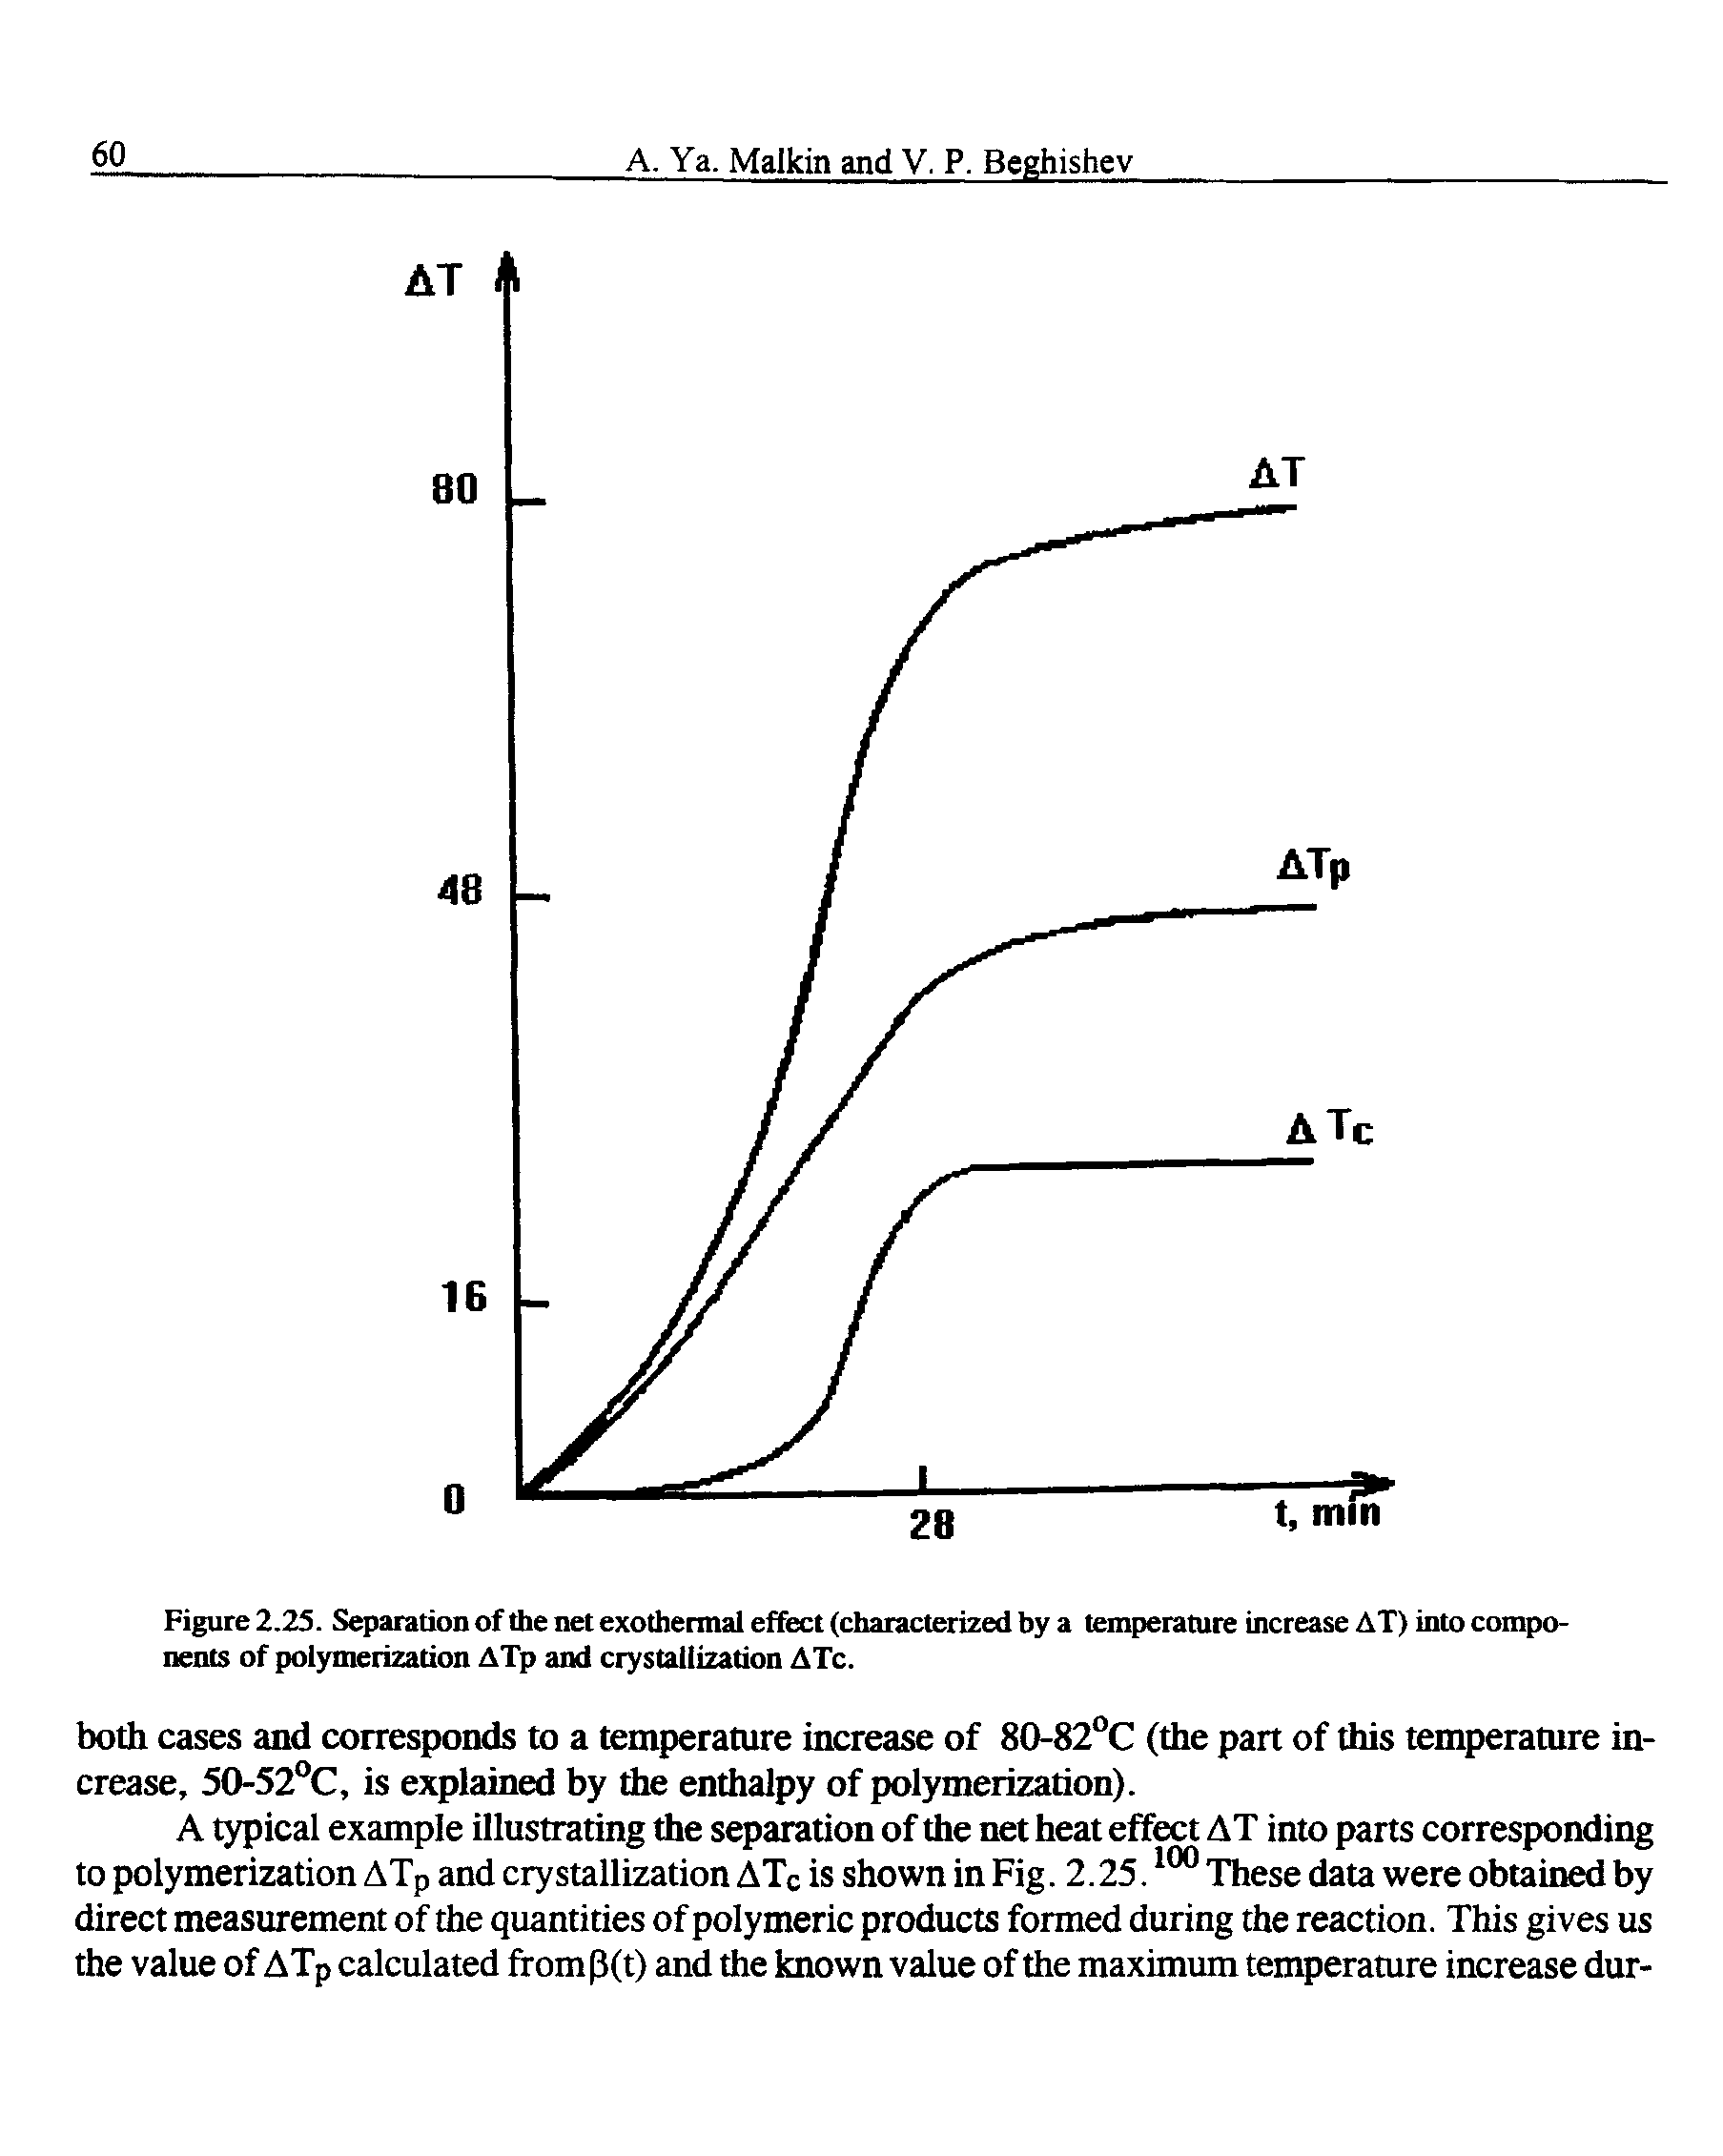 Figure 2.25. Separation of the net exothermal effect (characterized by a temperature increase AT) into components of polymerization ATp and crystallization ATc.